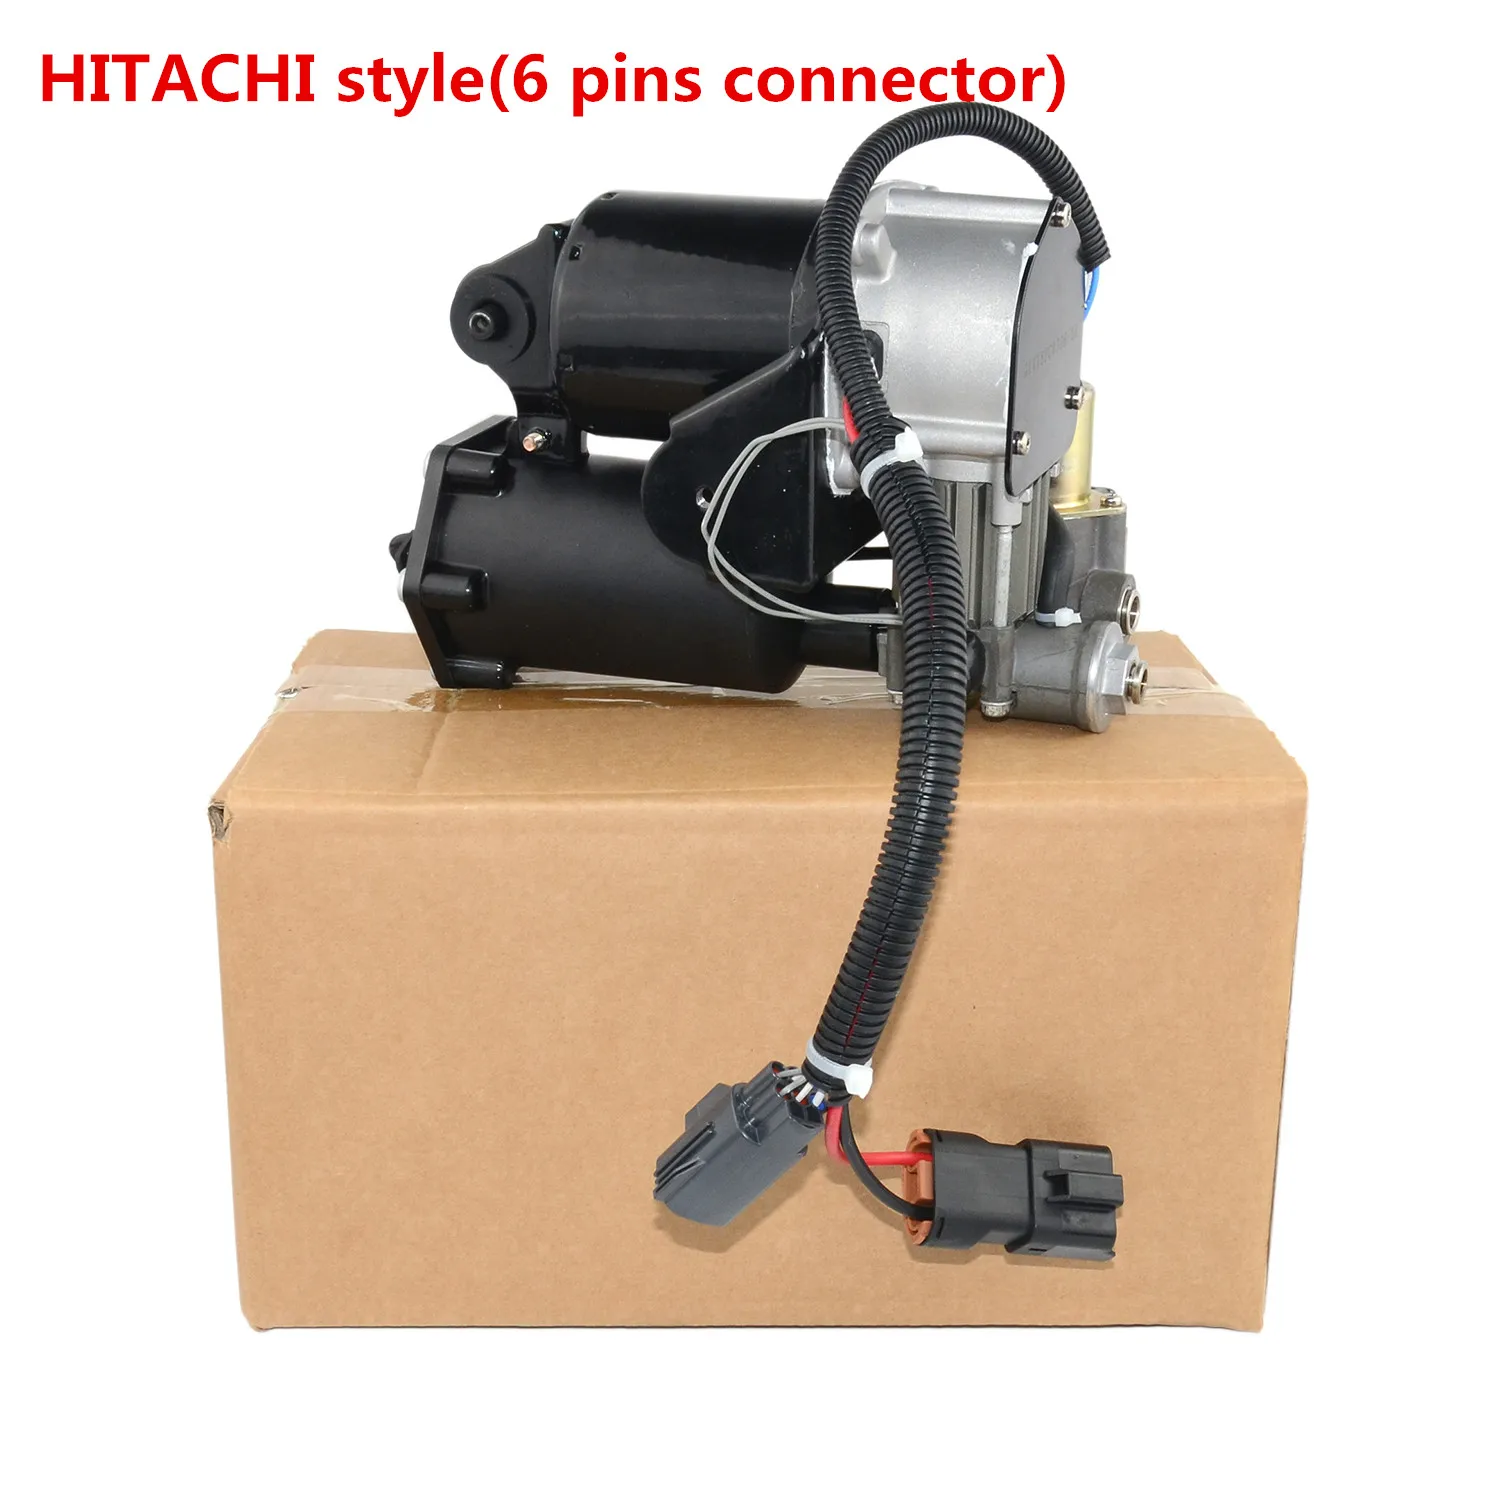 6 Pins Connector LR044360 YWB500220 Air Suspension Compressor Pump Hitachi Type for Discovery 3 2005-2009 for Range Rover Sport 2004-2009 